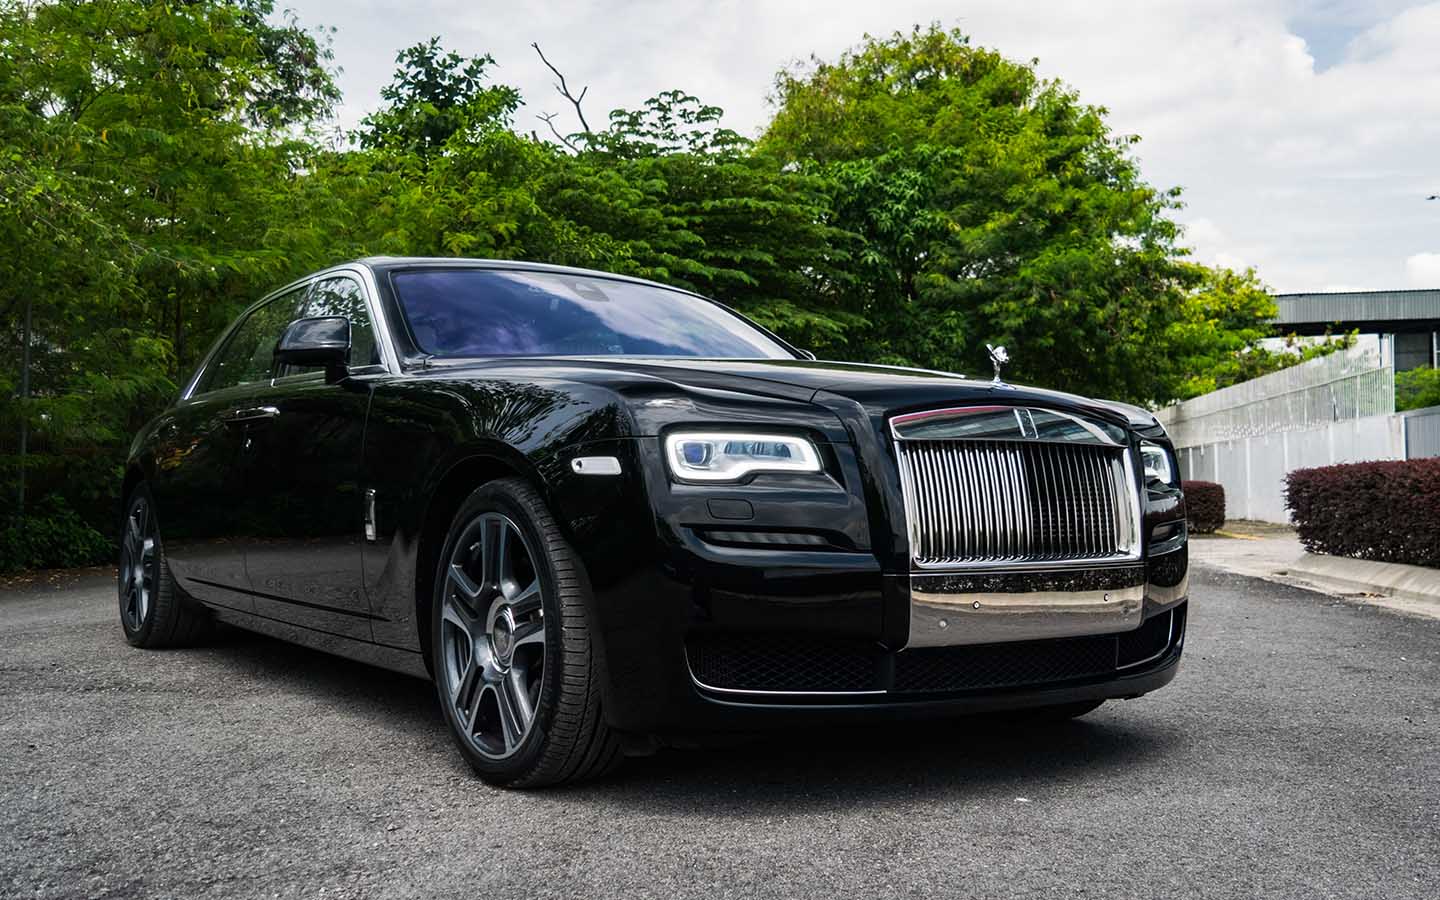 the Ghost is among the top rolls royce pre owned vehicles in the uae